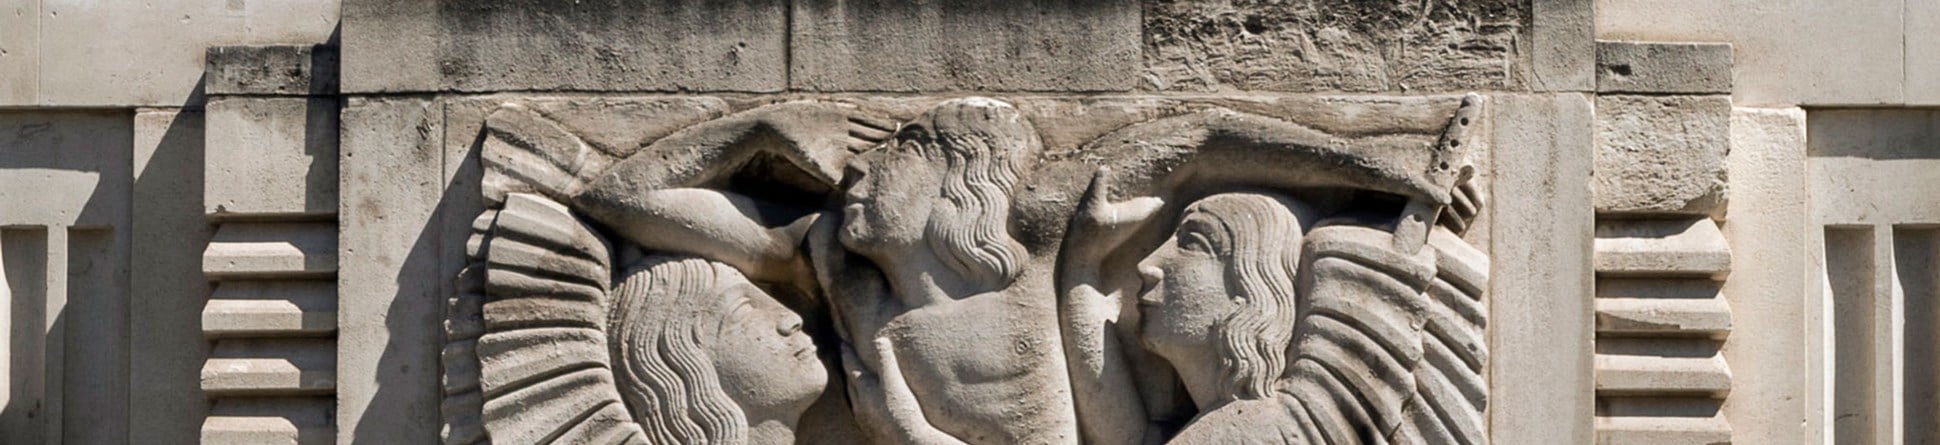 A relief sculpture on a building depicting two winged figures embracing a central figure who  is carrying a flute.